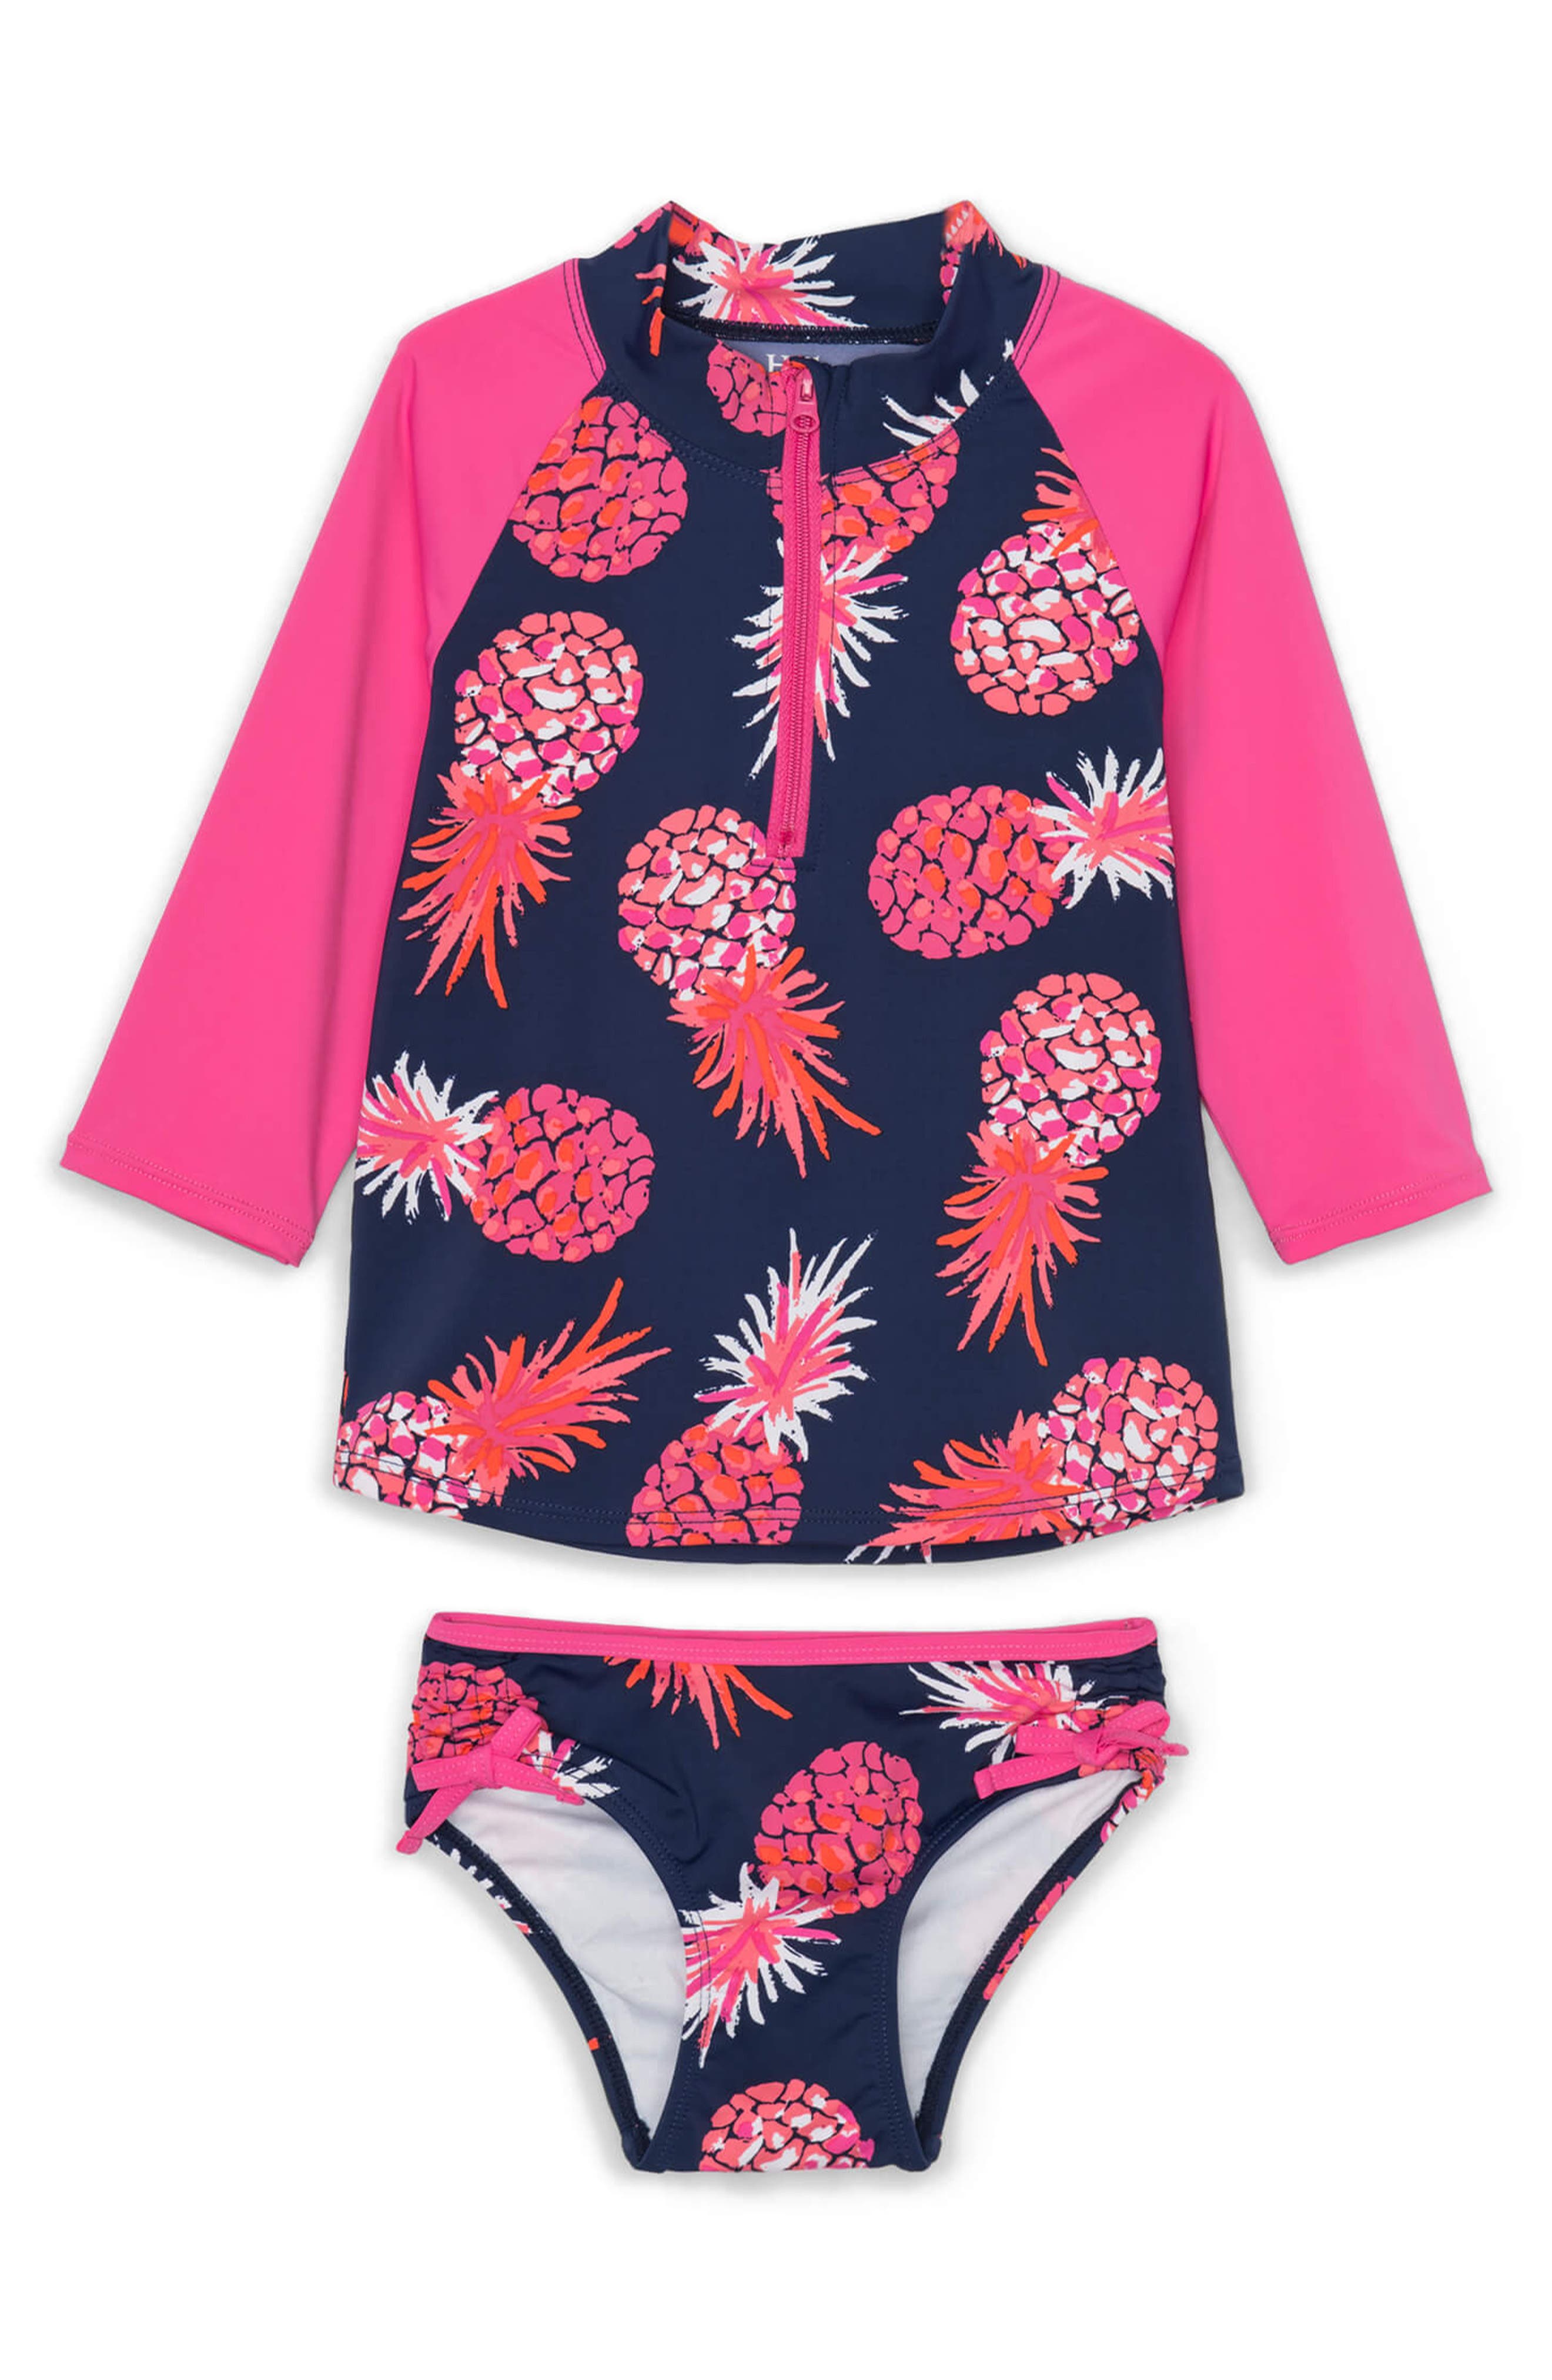 Moily Baby Little Girls Floral Tankini Set Long Sleeve Rash Guard Shirt with Bottoms Surf Bathing Suit 